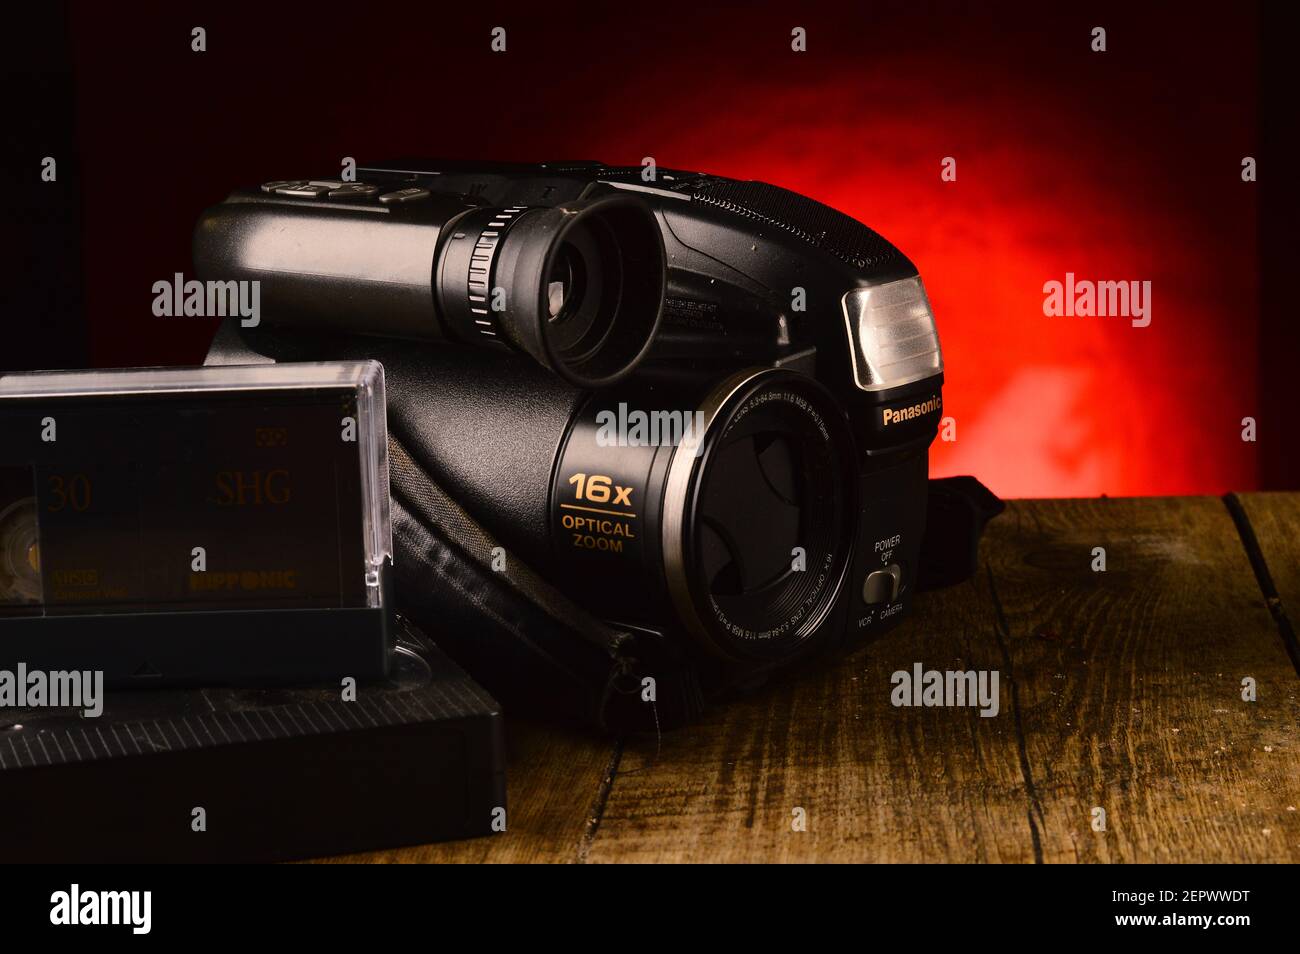 Old Panasonic camcorder movie camera with tapes nearby Stock Photo - Alamy